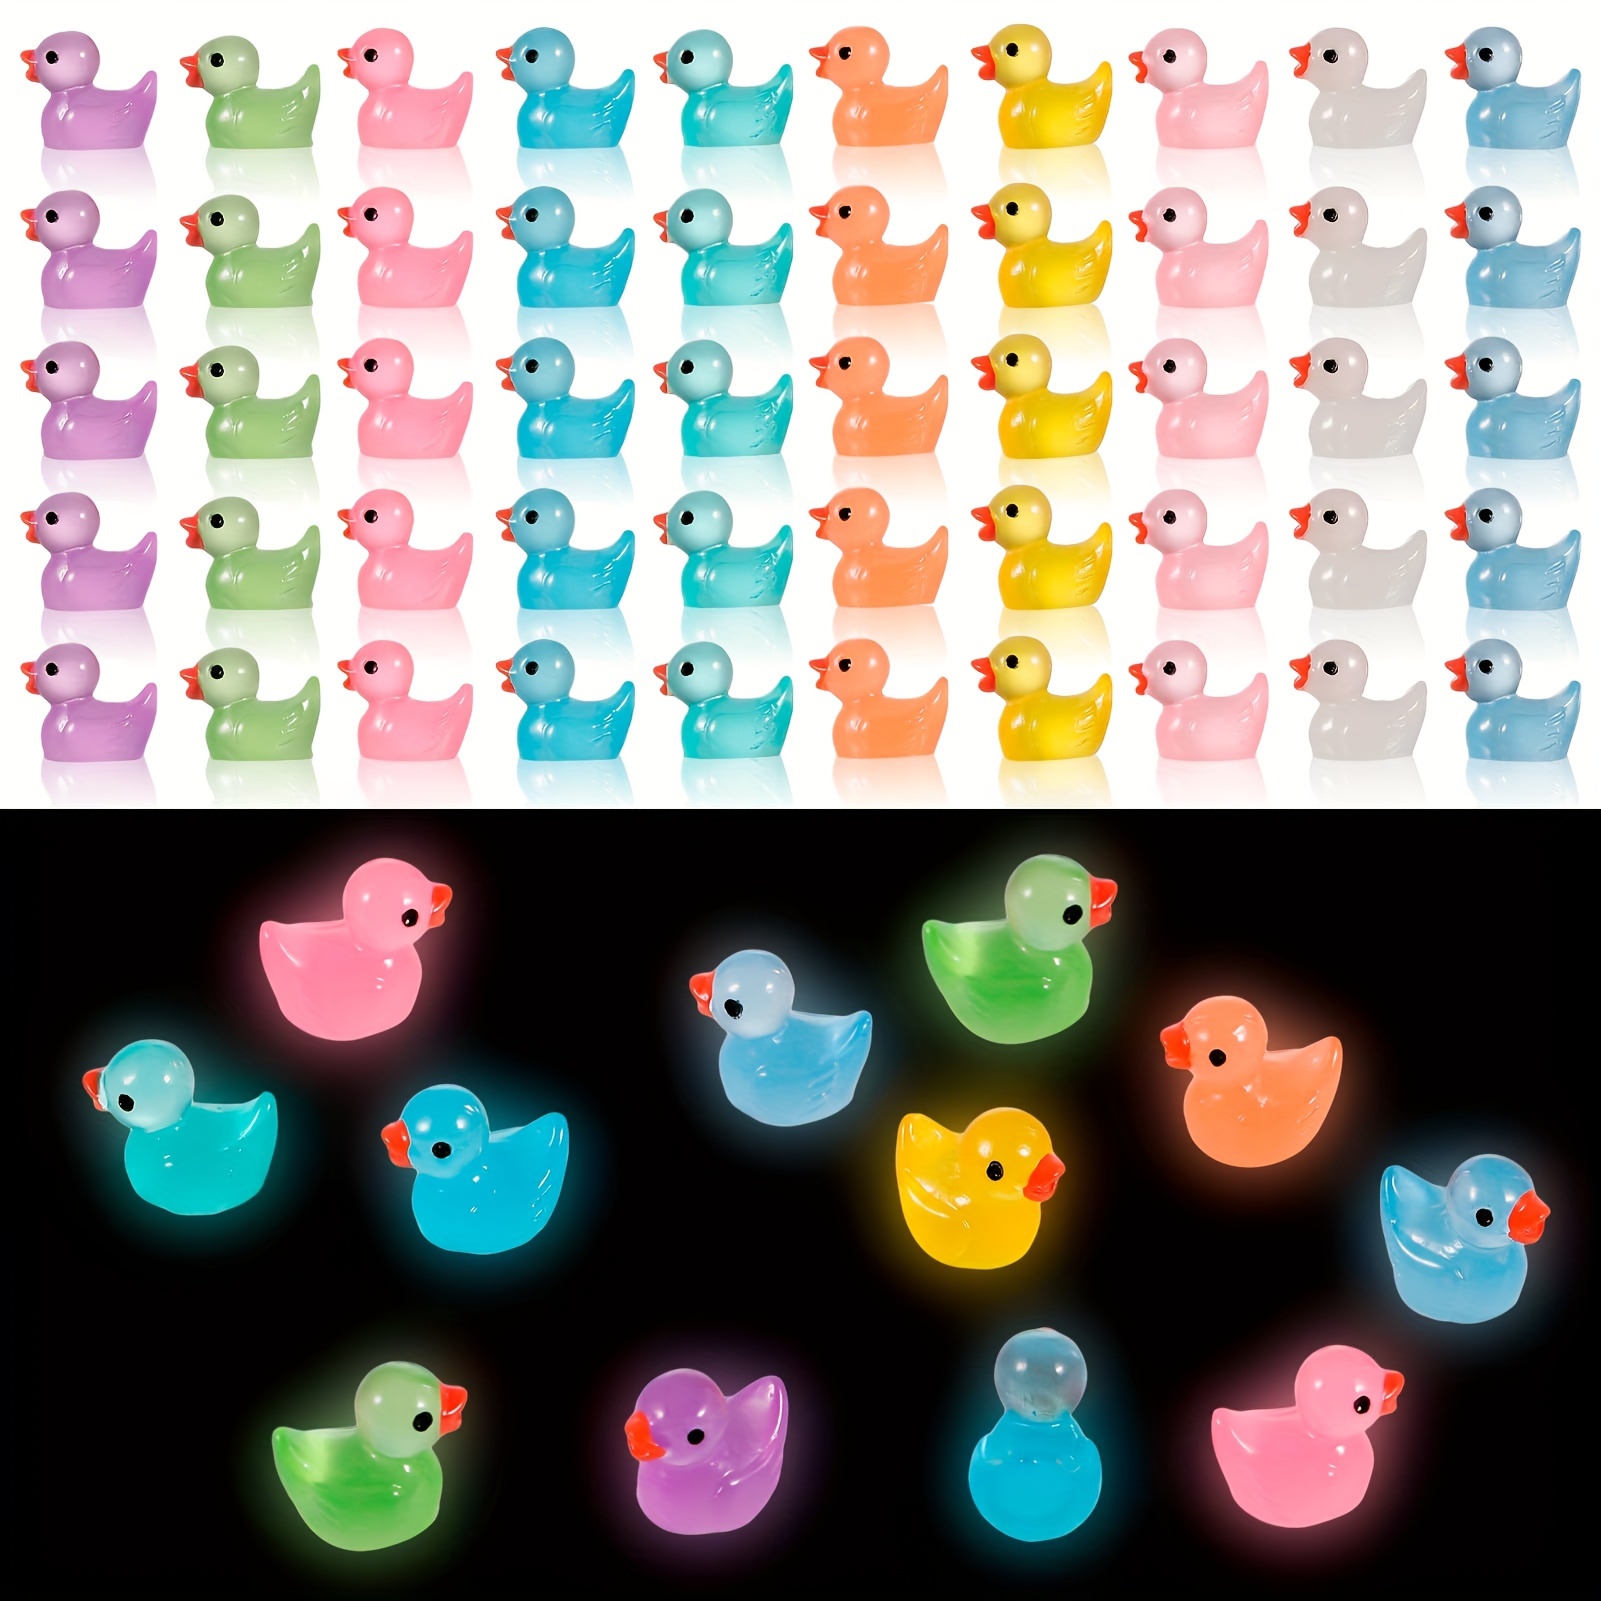 

100-piece Glow-in-the-dark Mini Ducks - Colorful Resin Figures For Fairy Gardens & Potted Plants